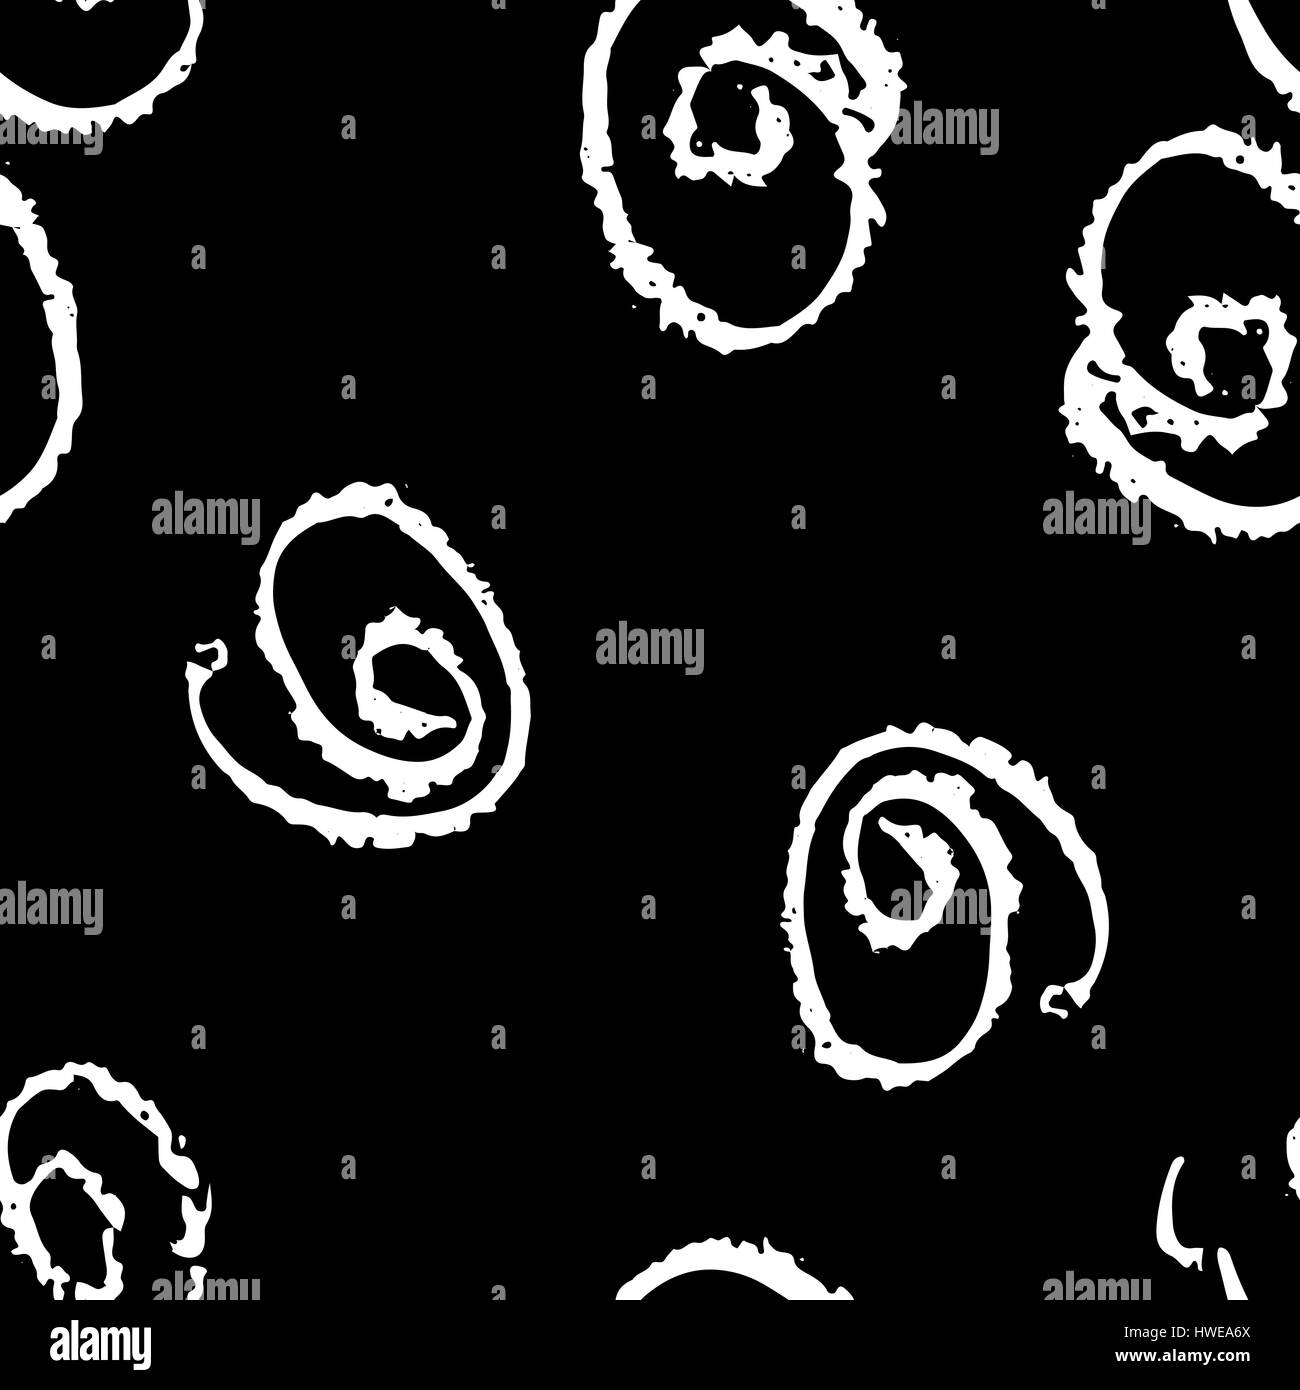 Seamless black and white ink swirls pattern. Vector grunge background. Vector illustration. Stock Vector